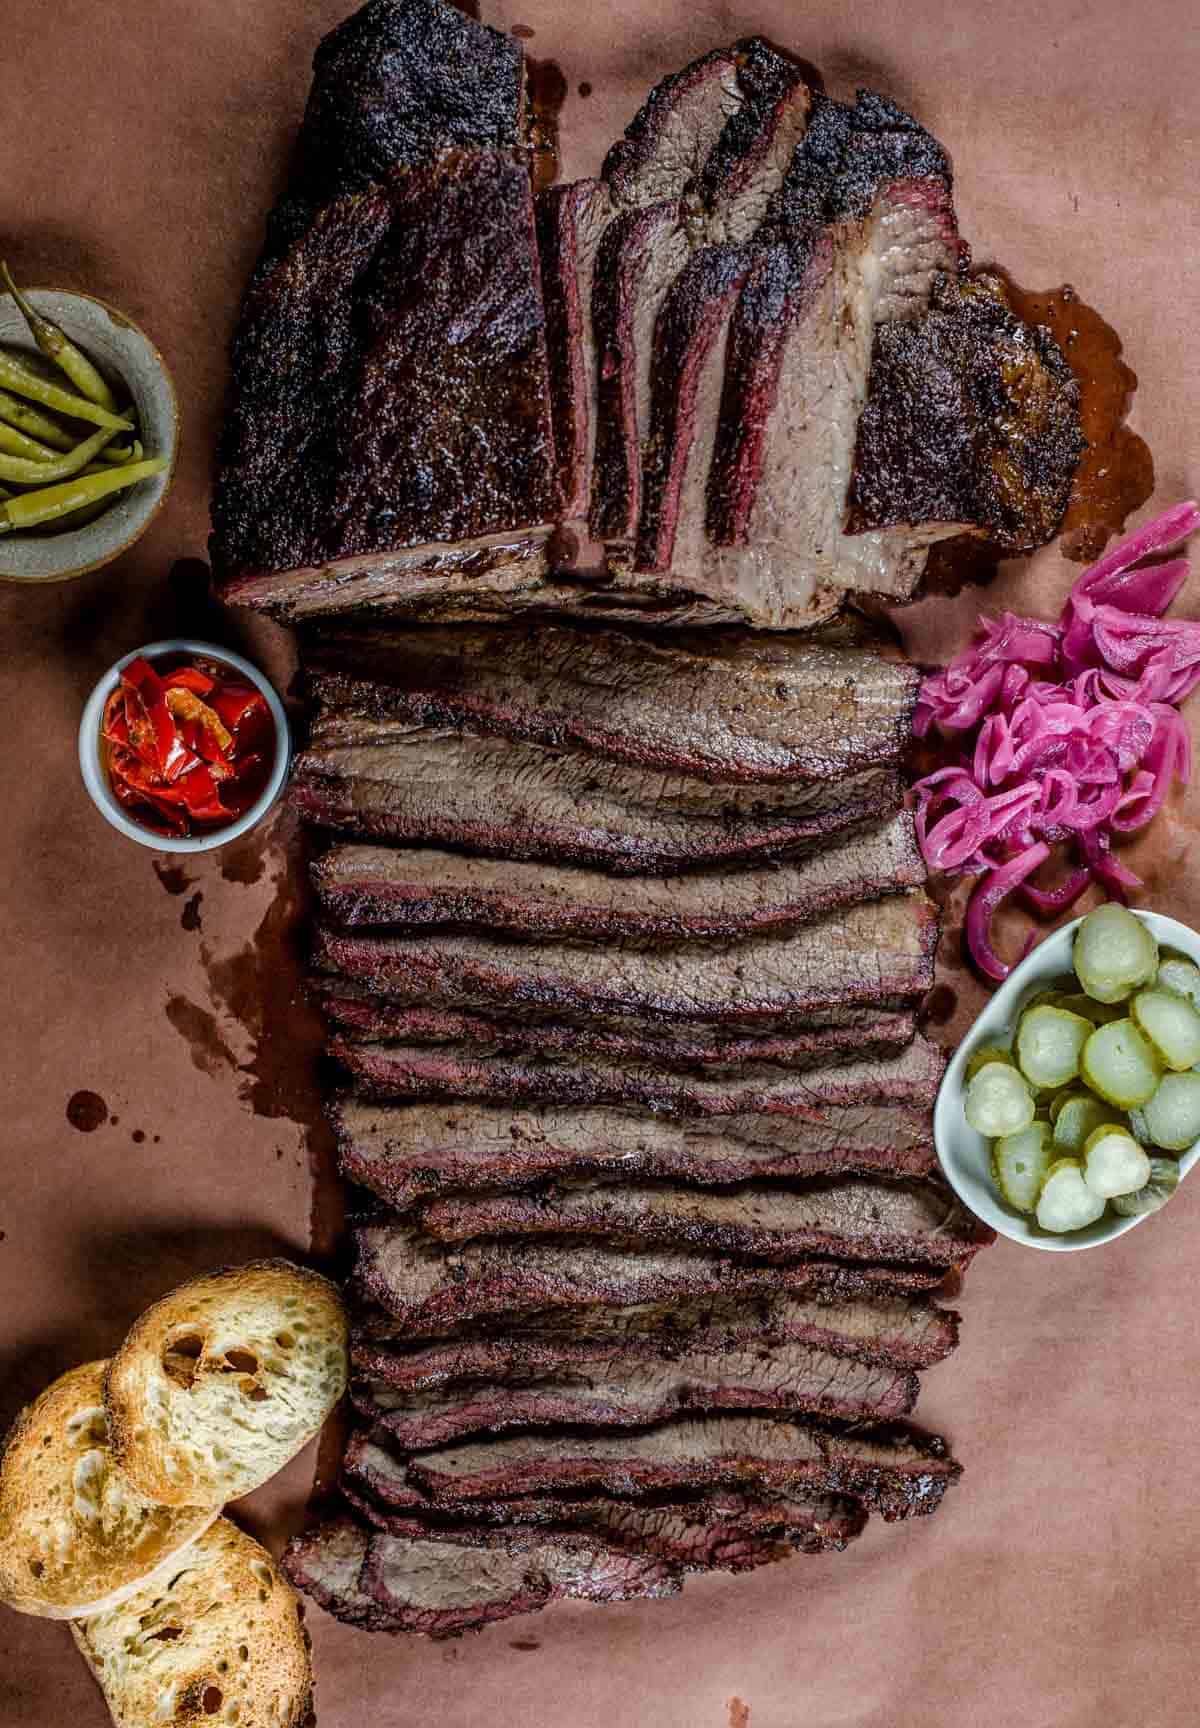 Smoked and sliced brisket served on butcher paper